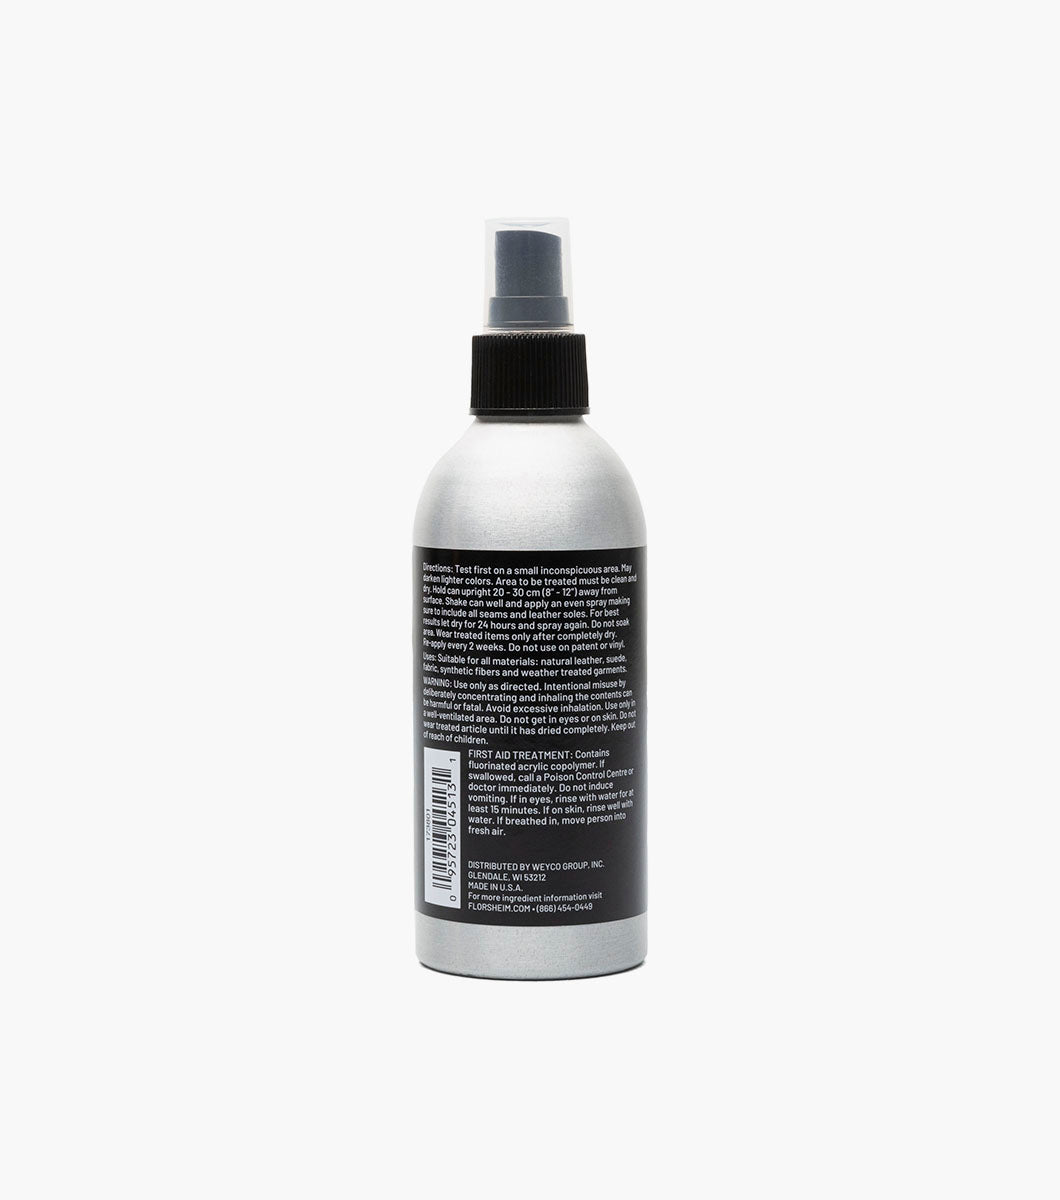 LEATHER & FABRIC PUMP SPRAY Preserves & Protectants